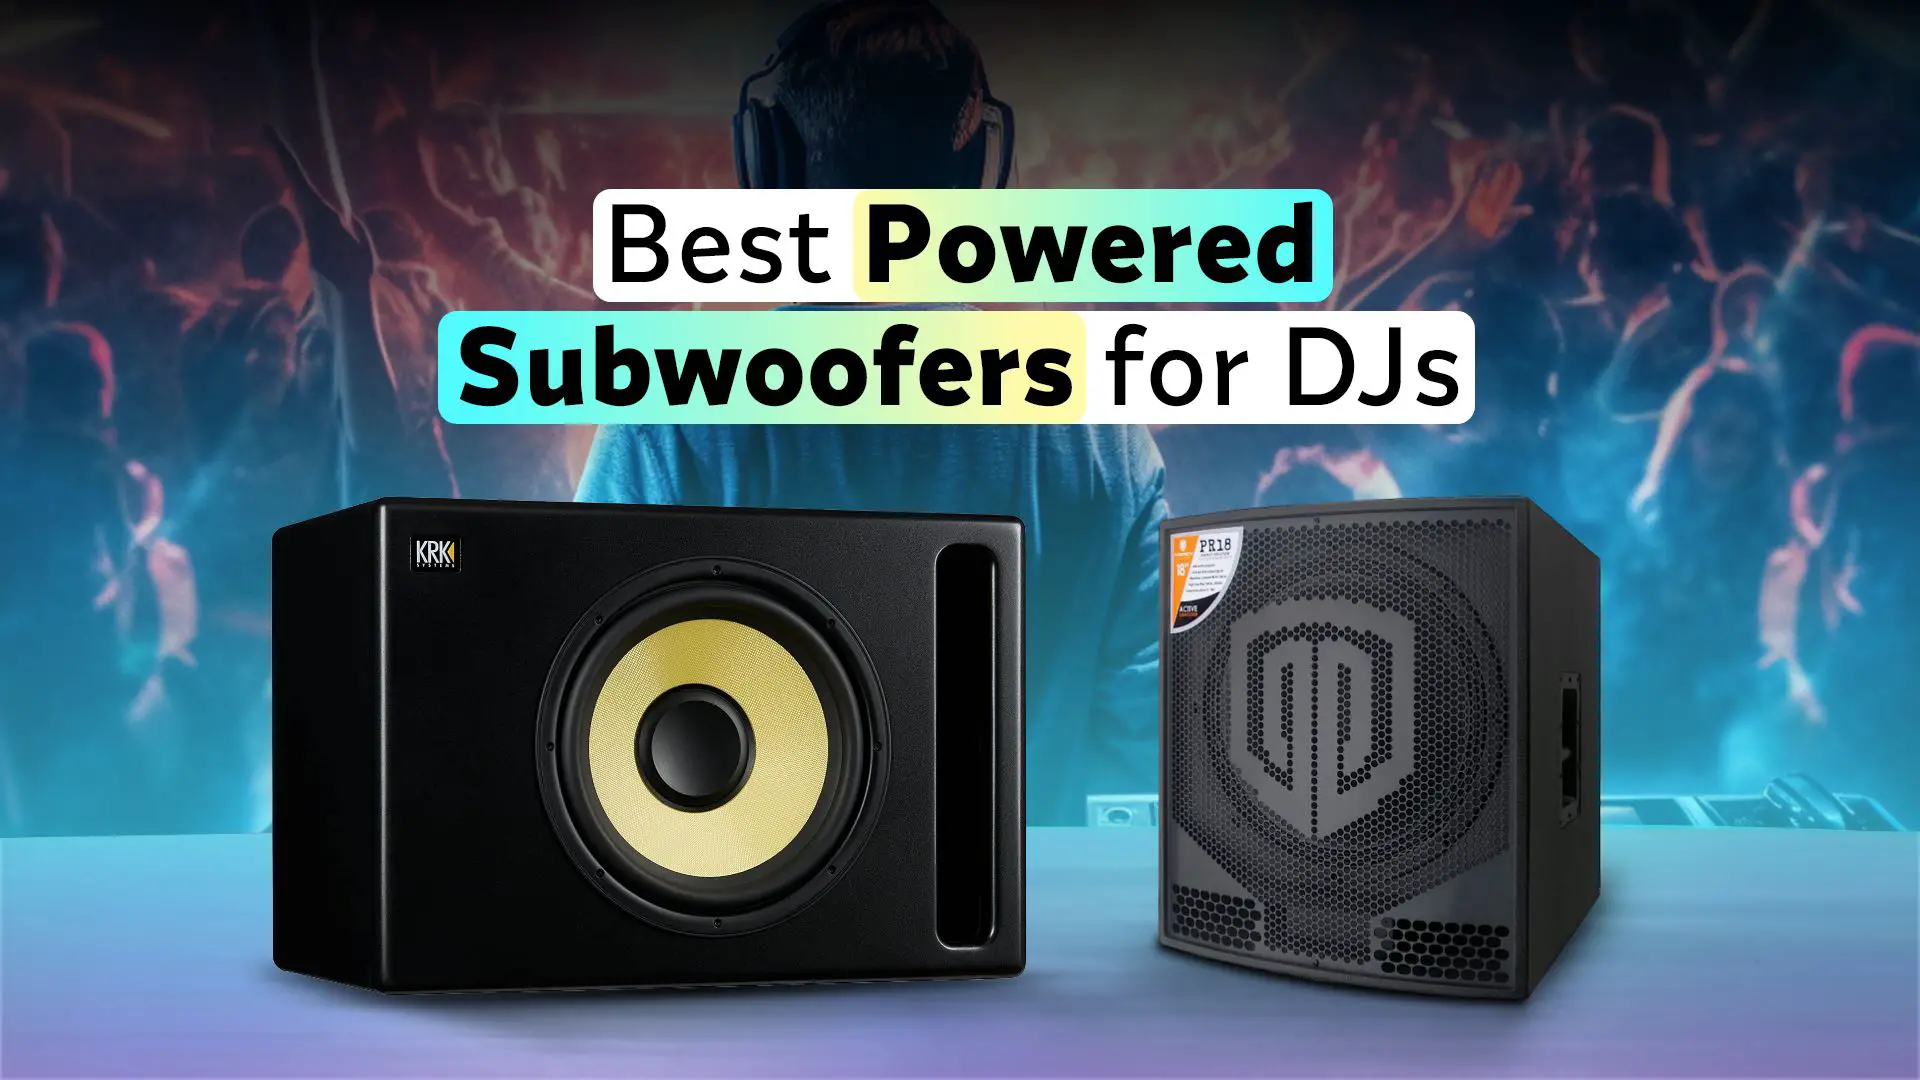 Best Powered Subwoofers for DJs